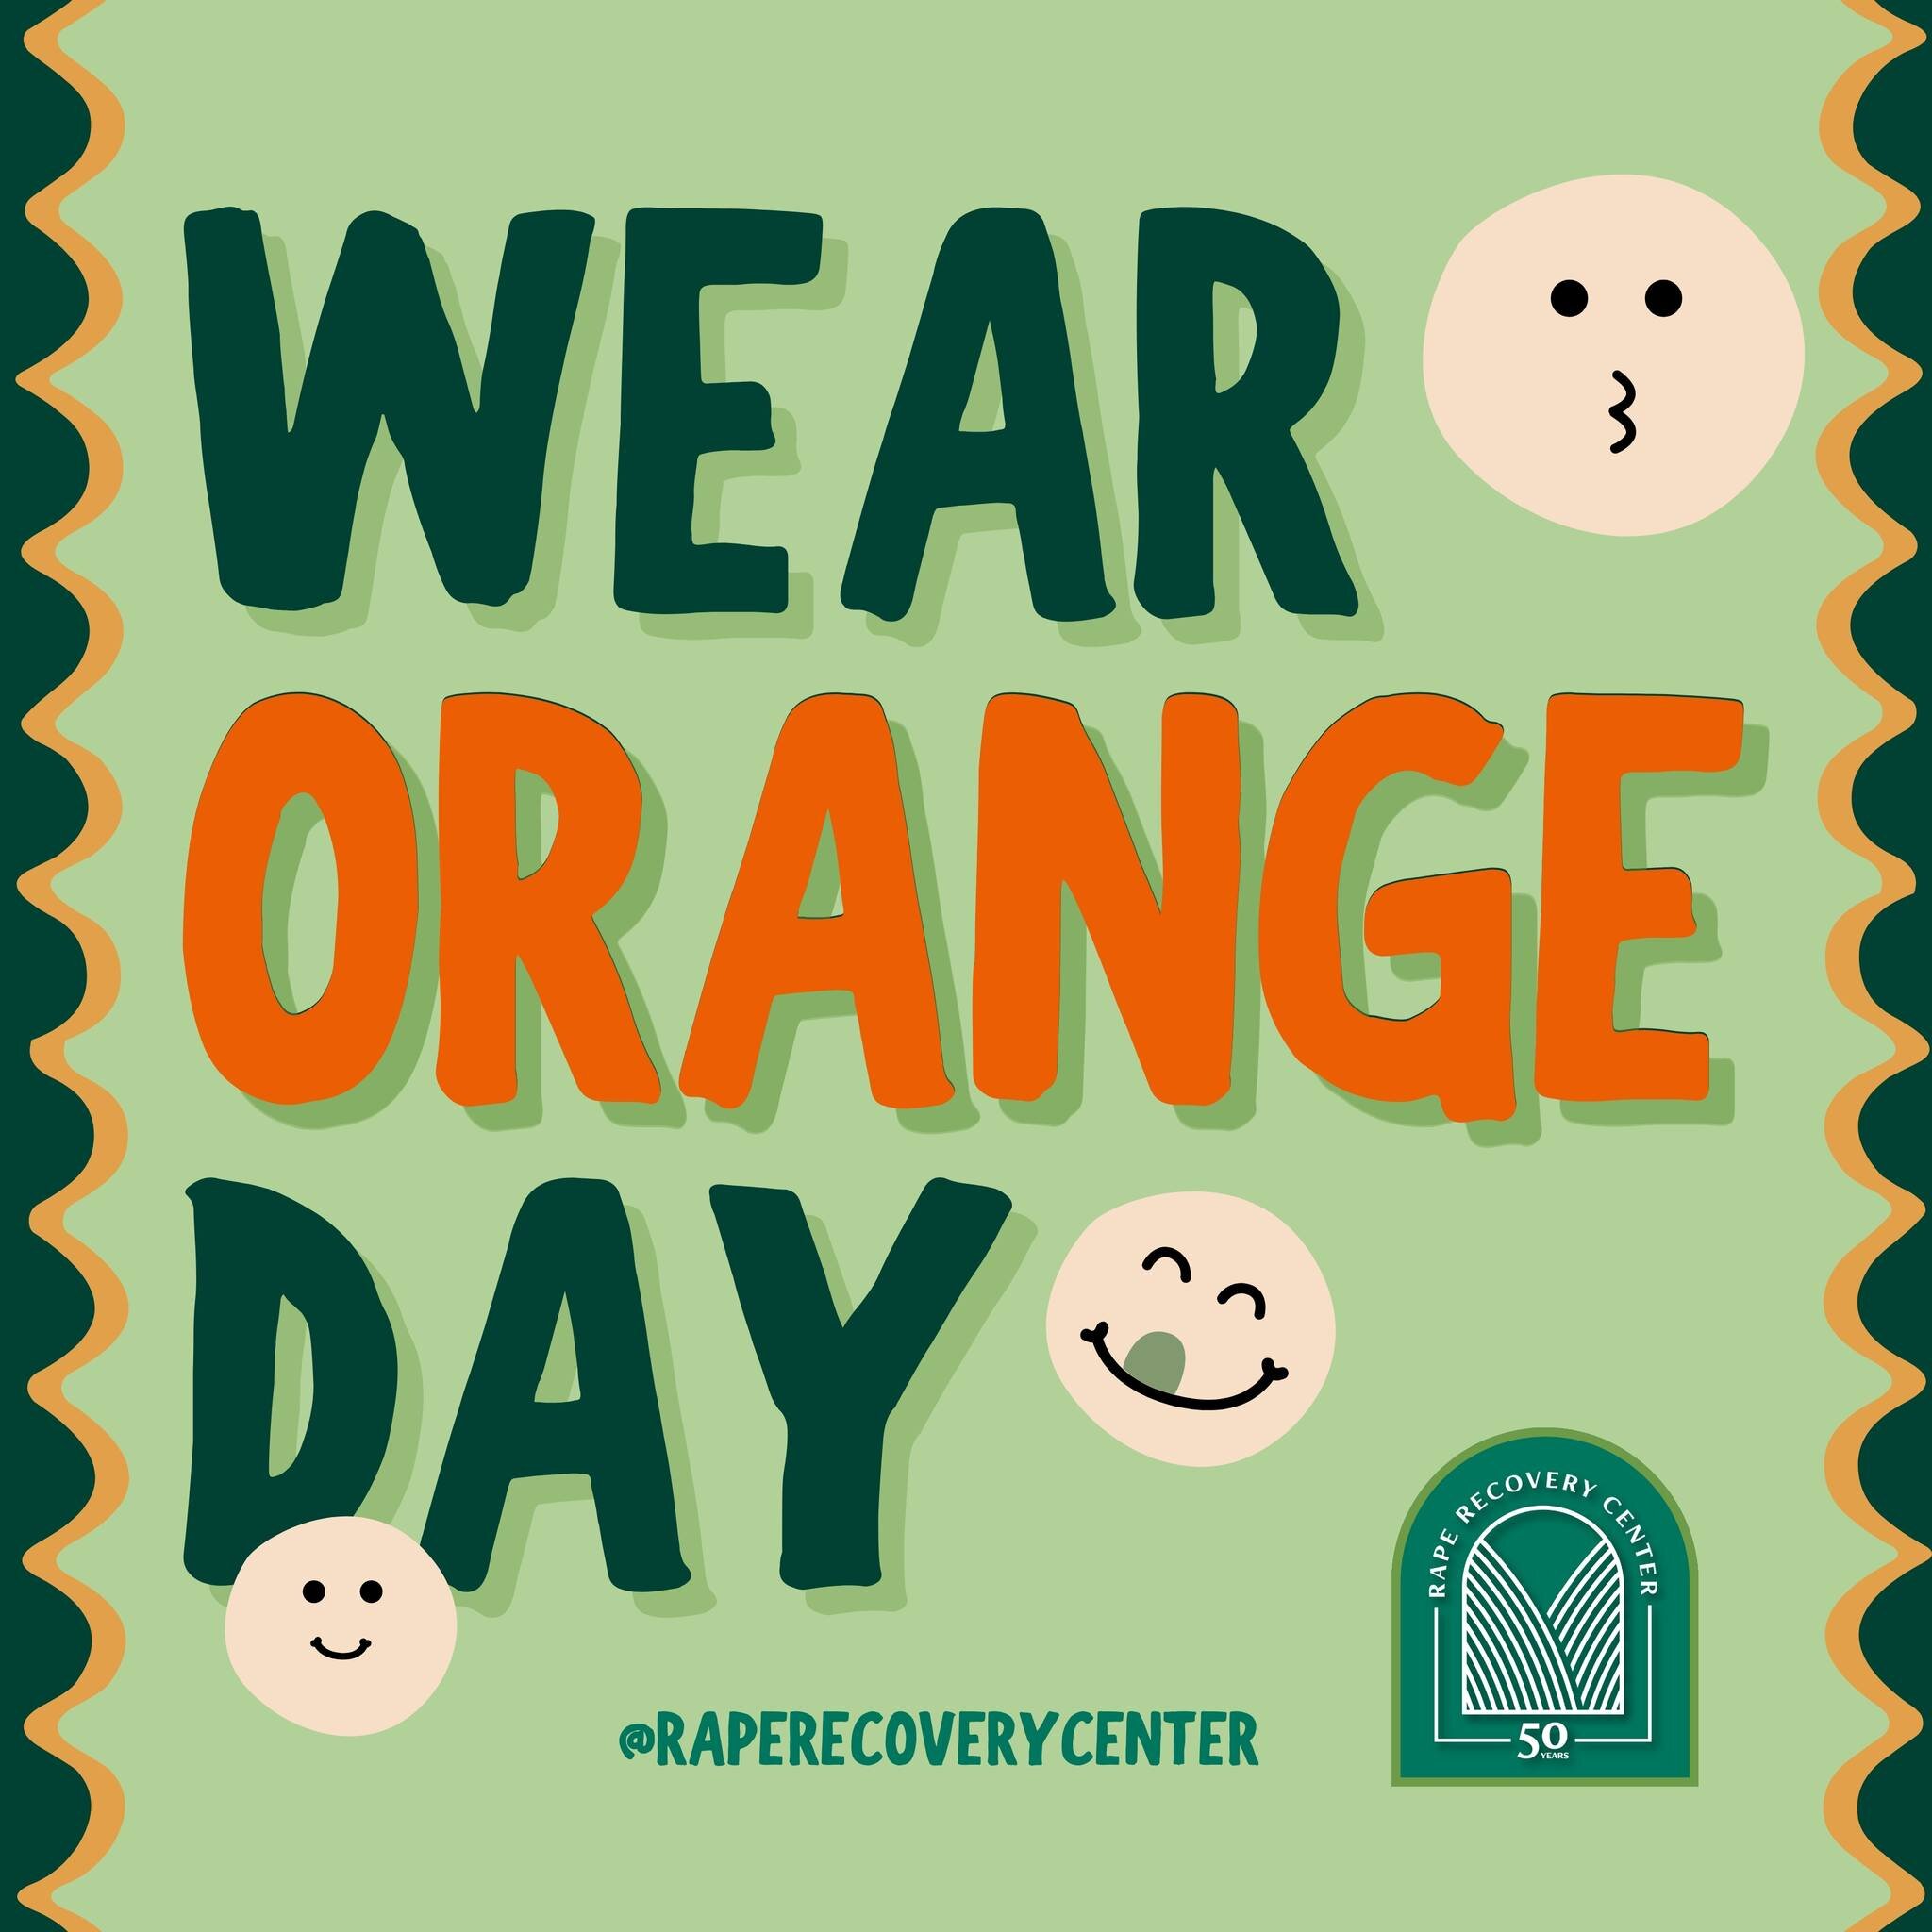 🧡 Today is #wearorangeday! Every TDVAM, we wear orange to show solidarity and raise awareness about dating violence.🧡 Share your selfie in orange with us today by using #LoveLikeThat #TDVAM24 and tag us @Rape Recovery Center